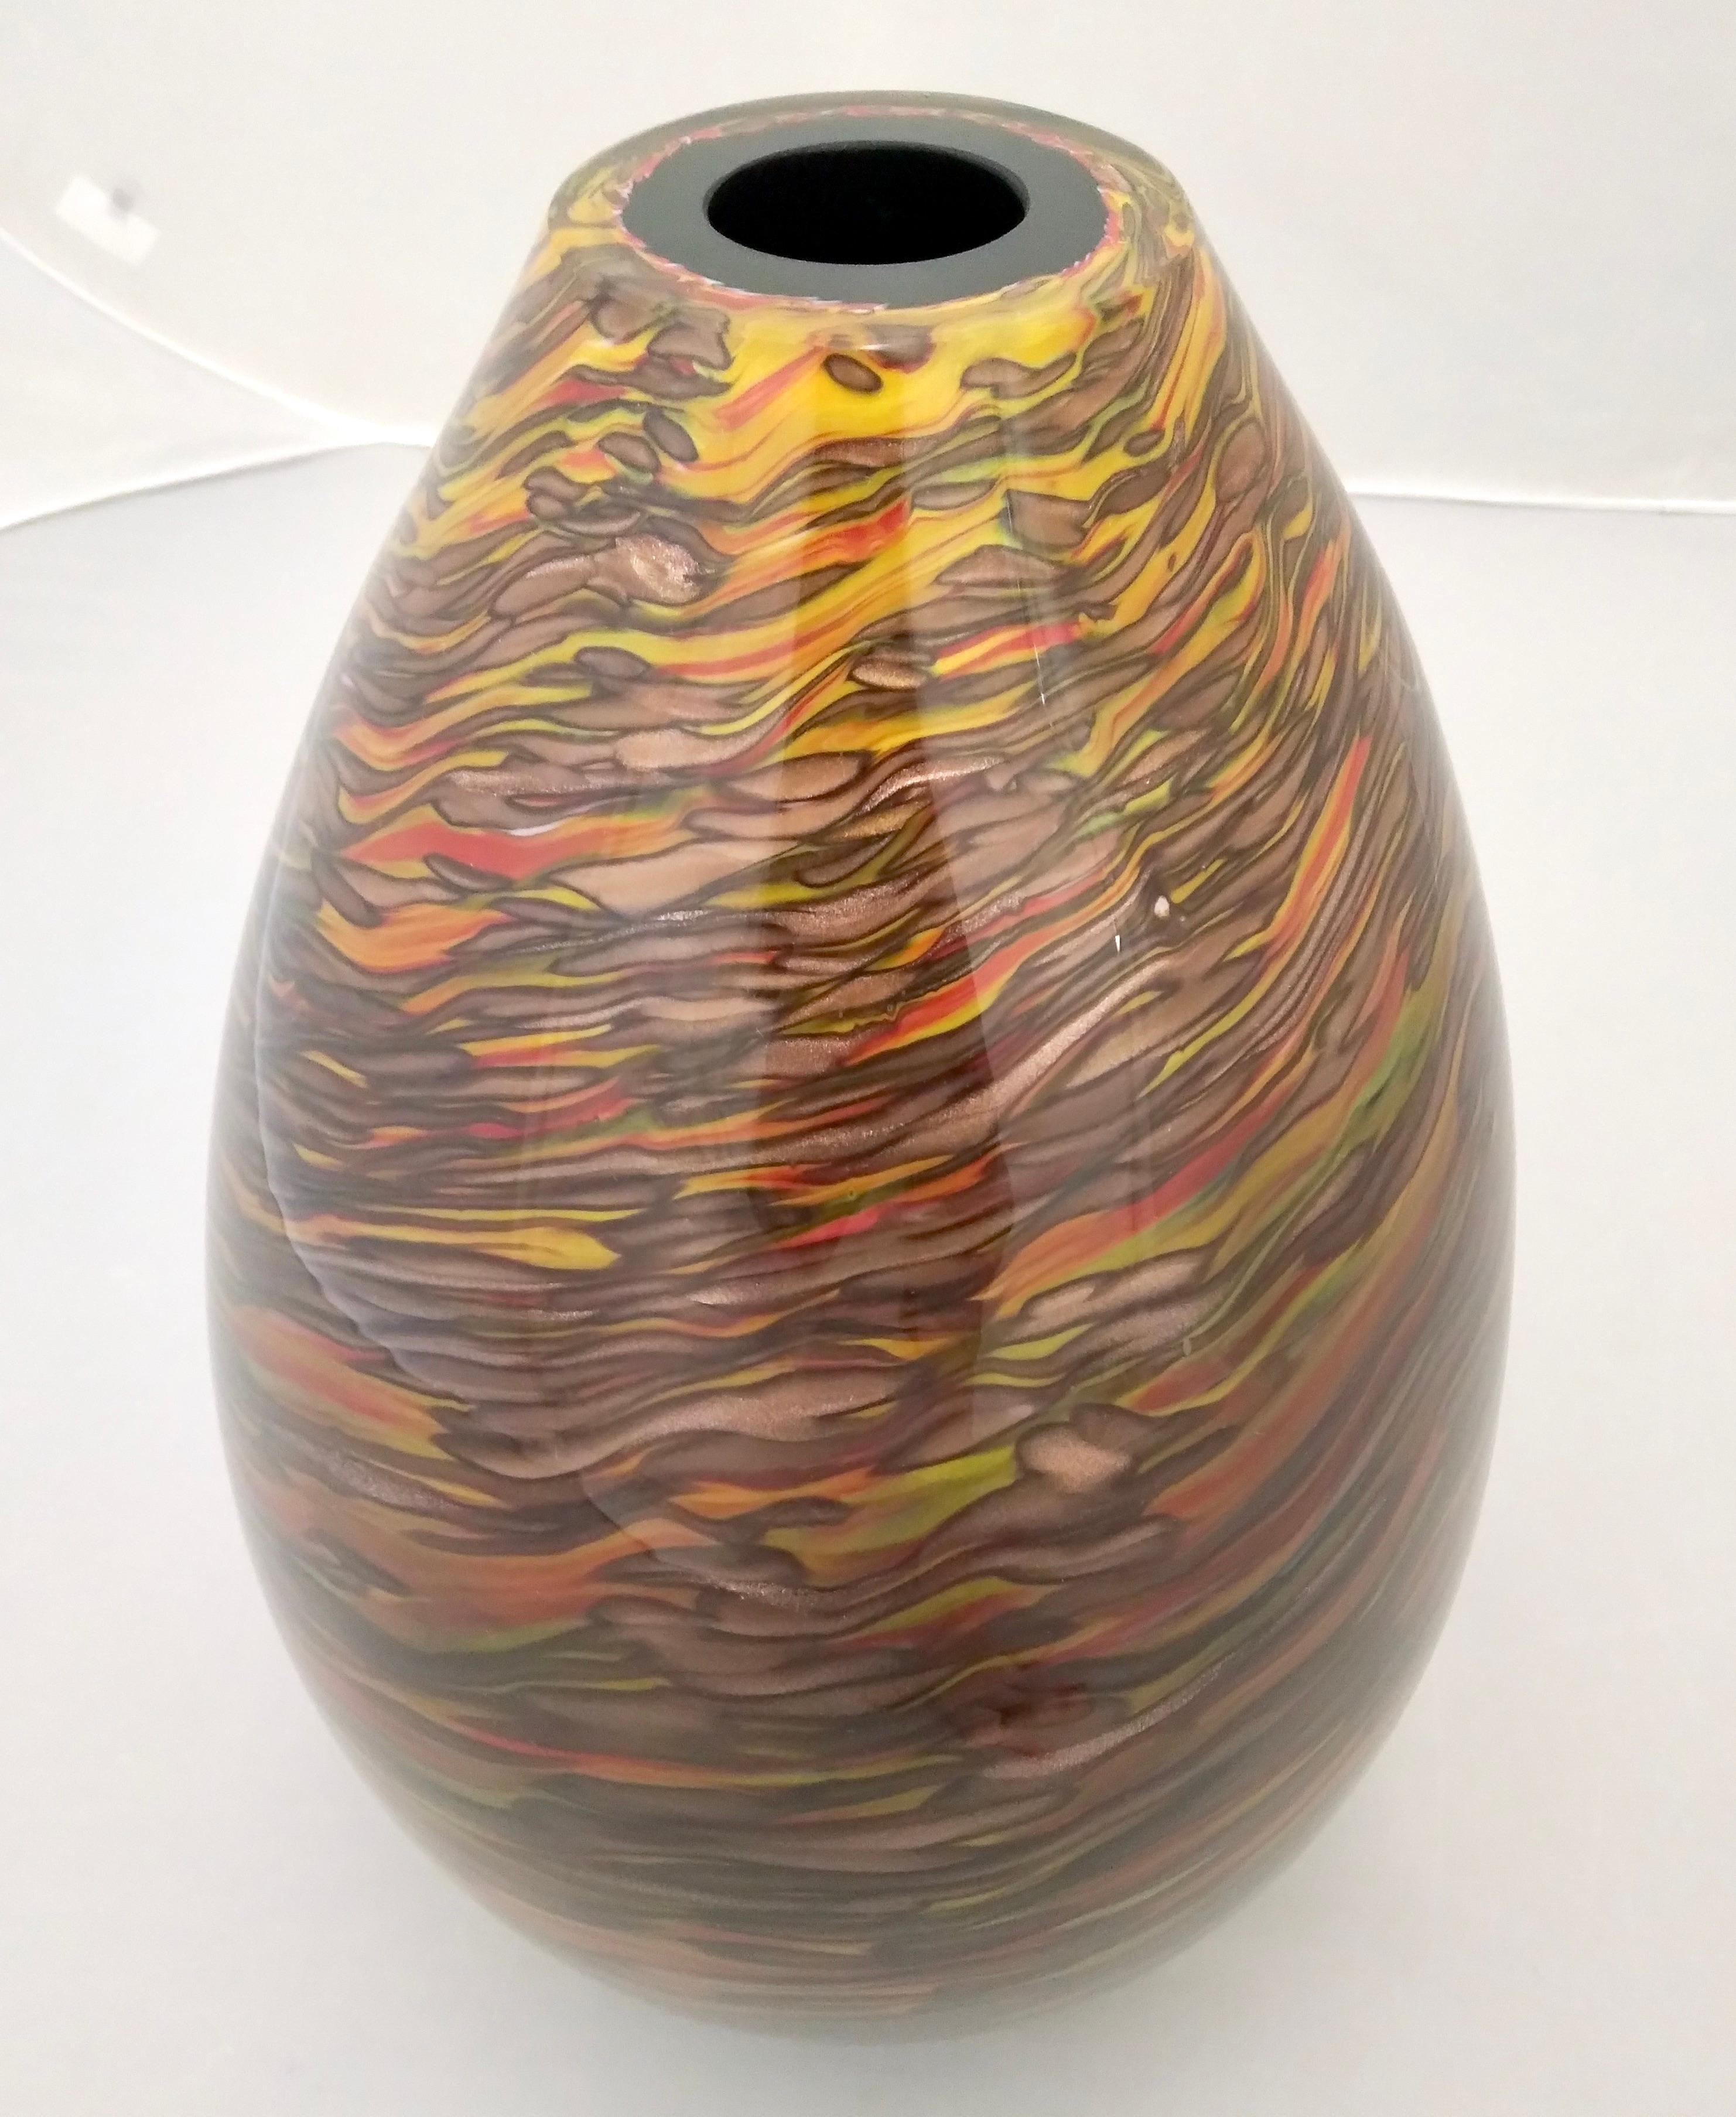 Formia 1980s Modern Ovoid Brown Yellow Red Orange Gold Murano Glass Vase For Sale 3